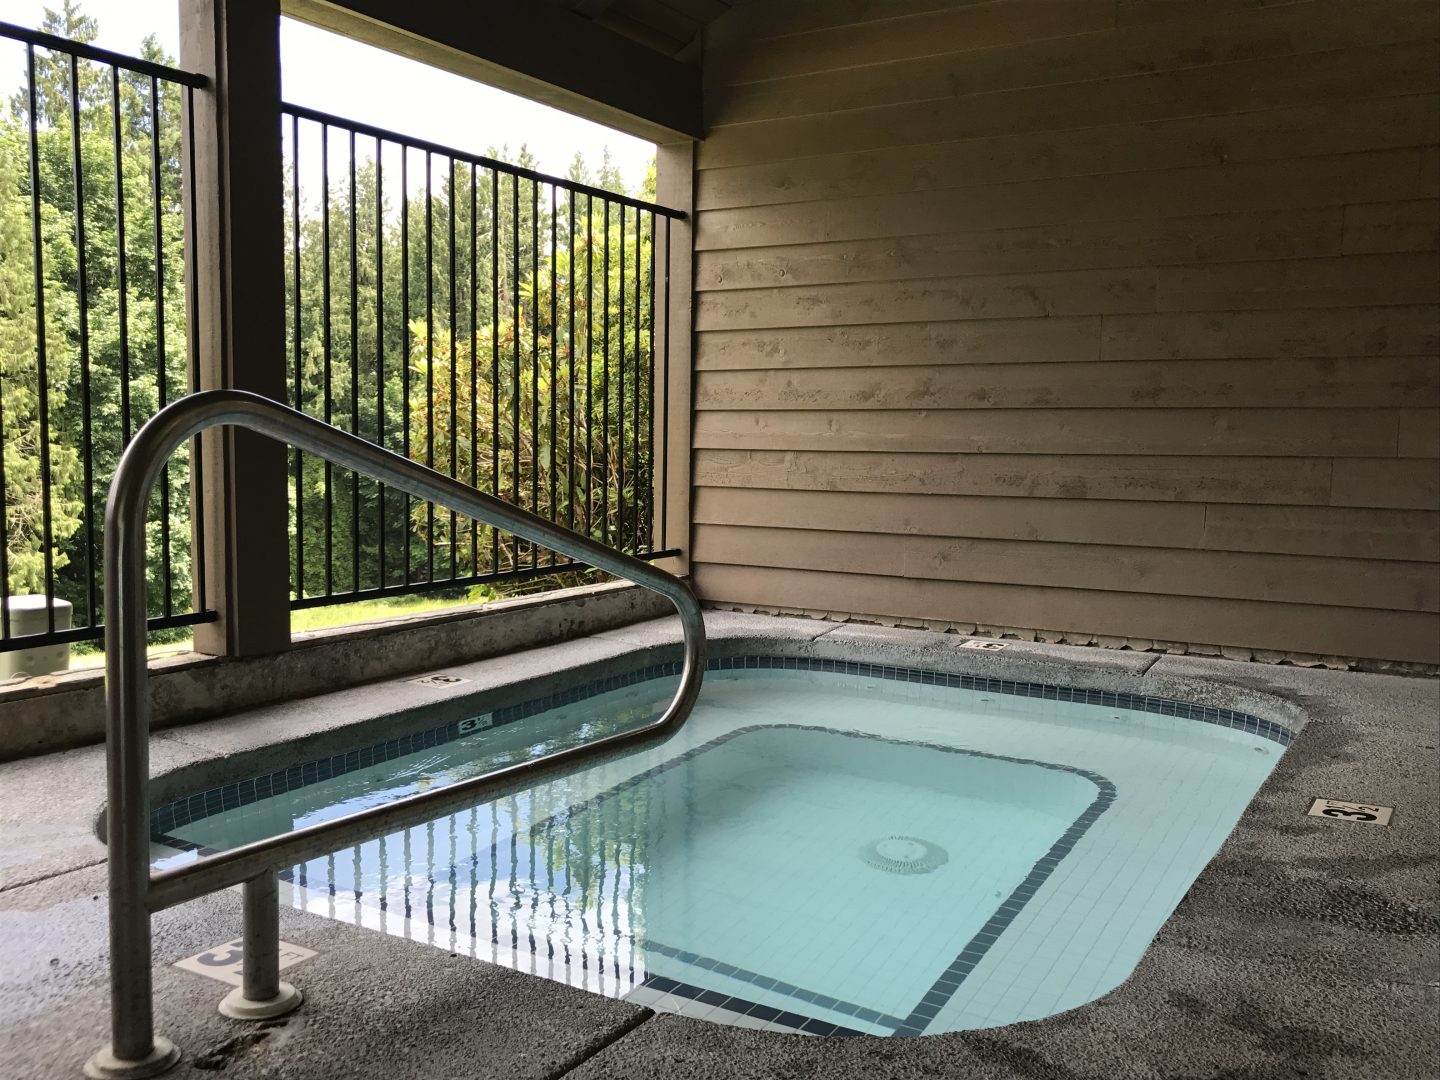 The spa overlooks a natural area and is set aside from the pool deck just enough to make it a little more quiet and relaxing.